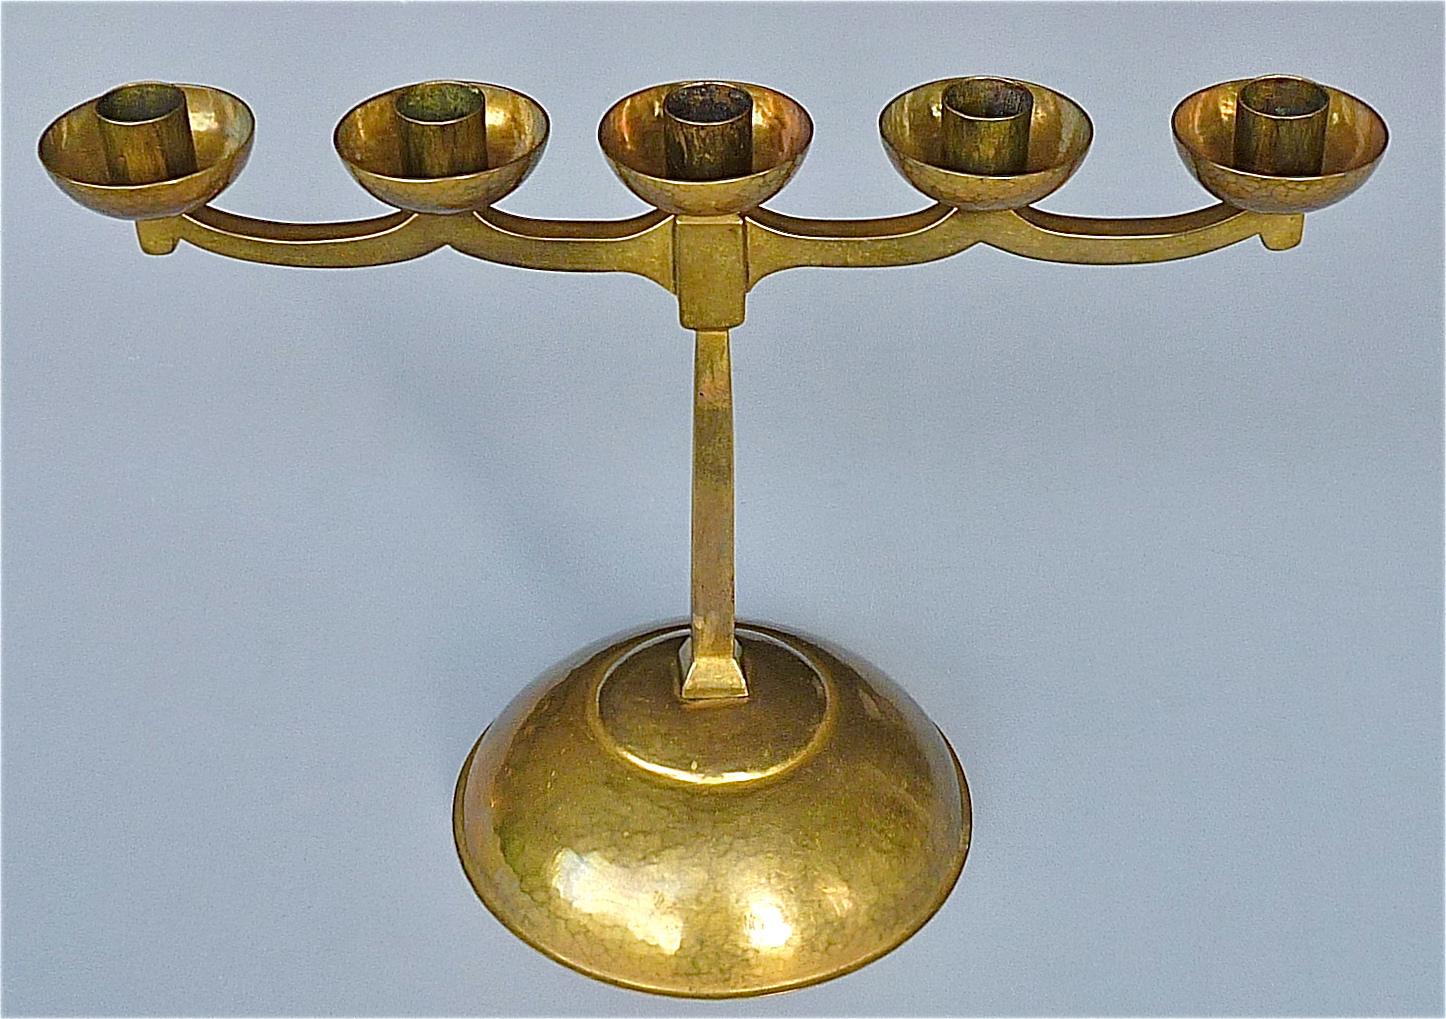 Stunning hand-chased five light solid patinated brass candleholder with hammered surface structure by master August Bohde, Söcking, Germany circa 1920-1930. The heavy candelabra influenced by the Bauhaus and Art Deco movement is marked 5 times with